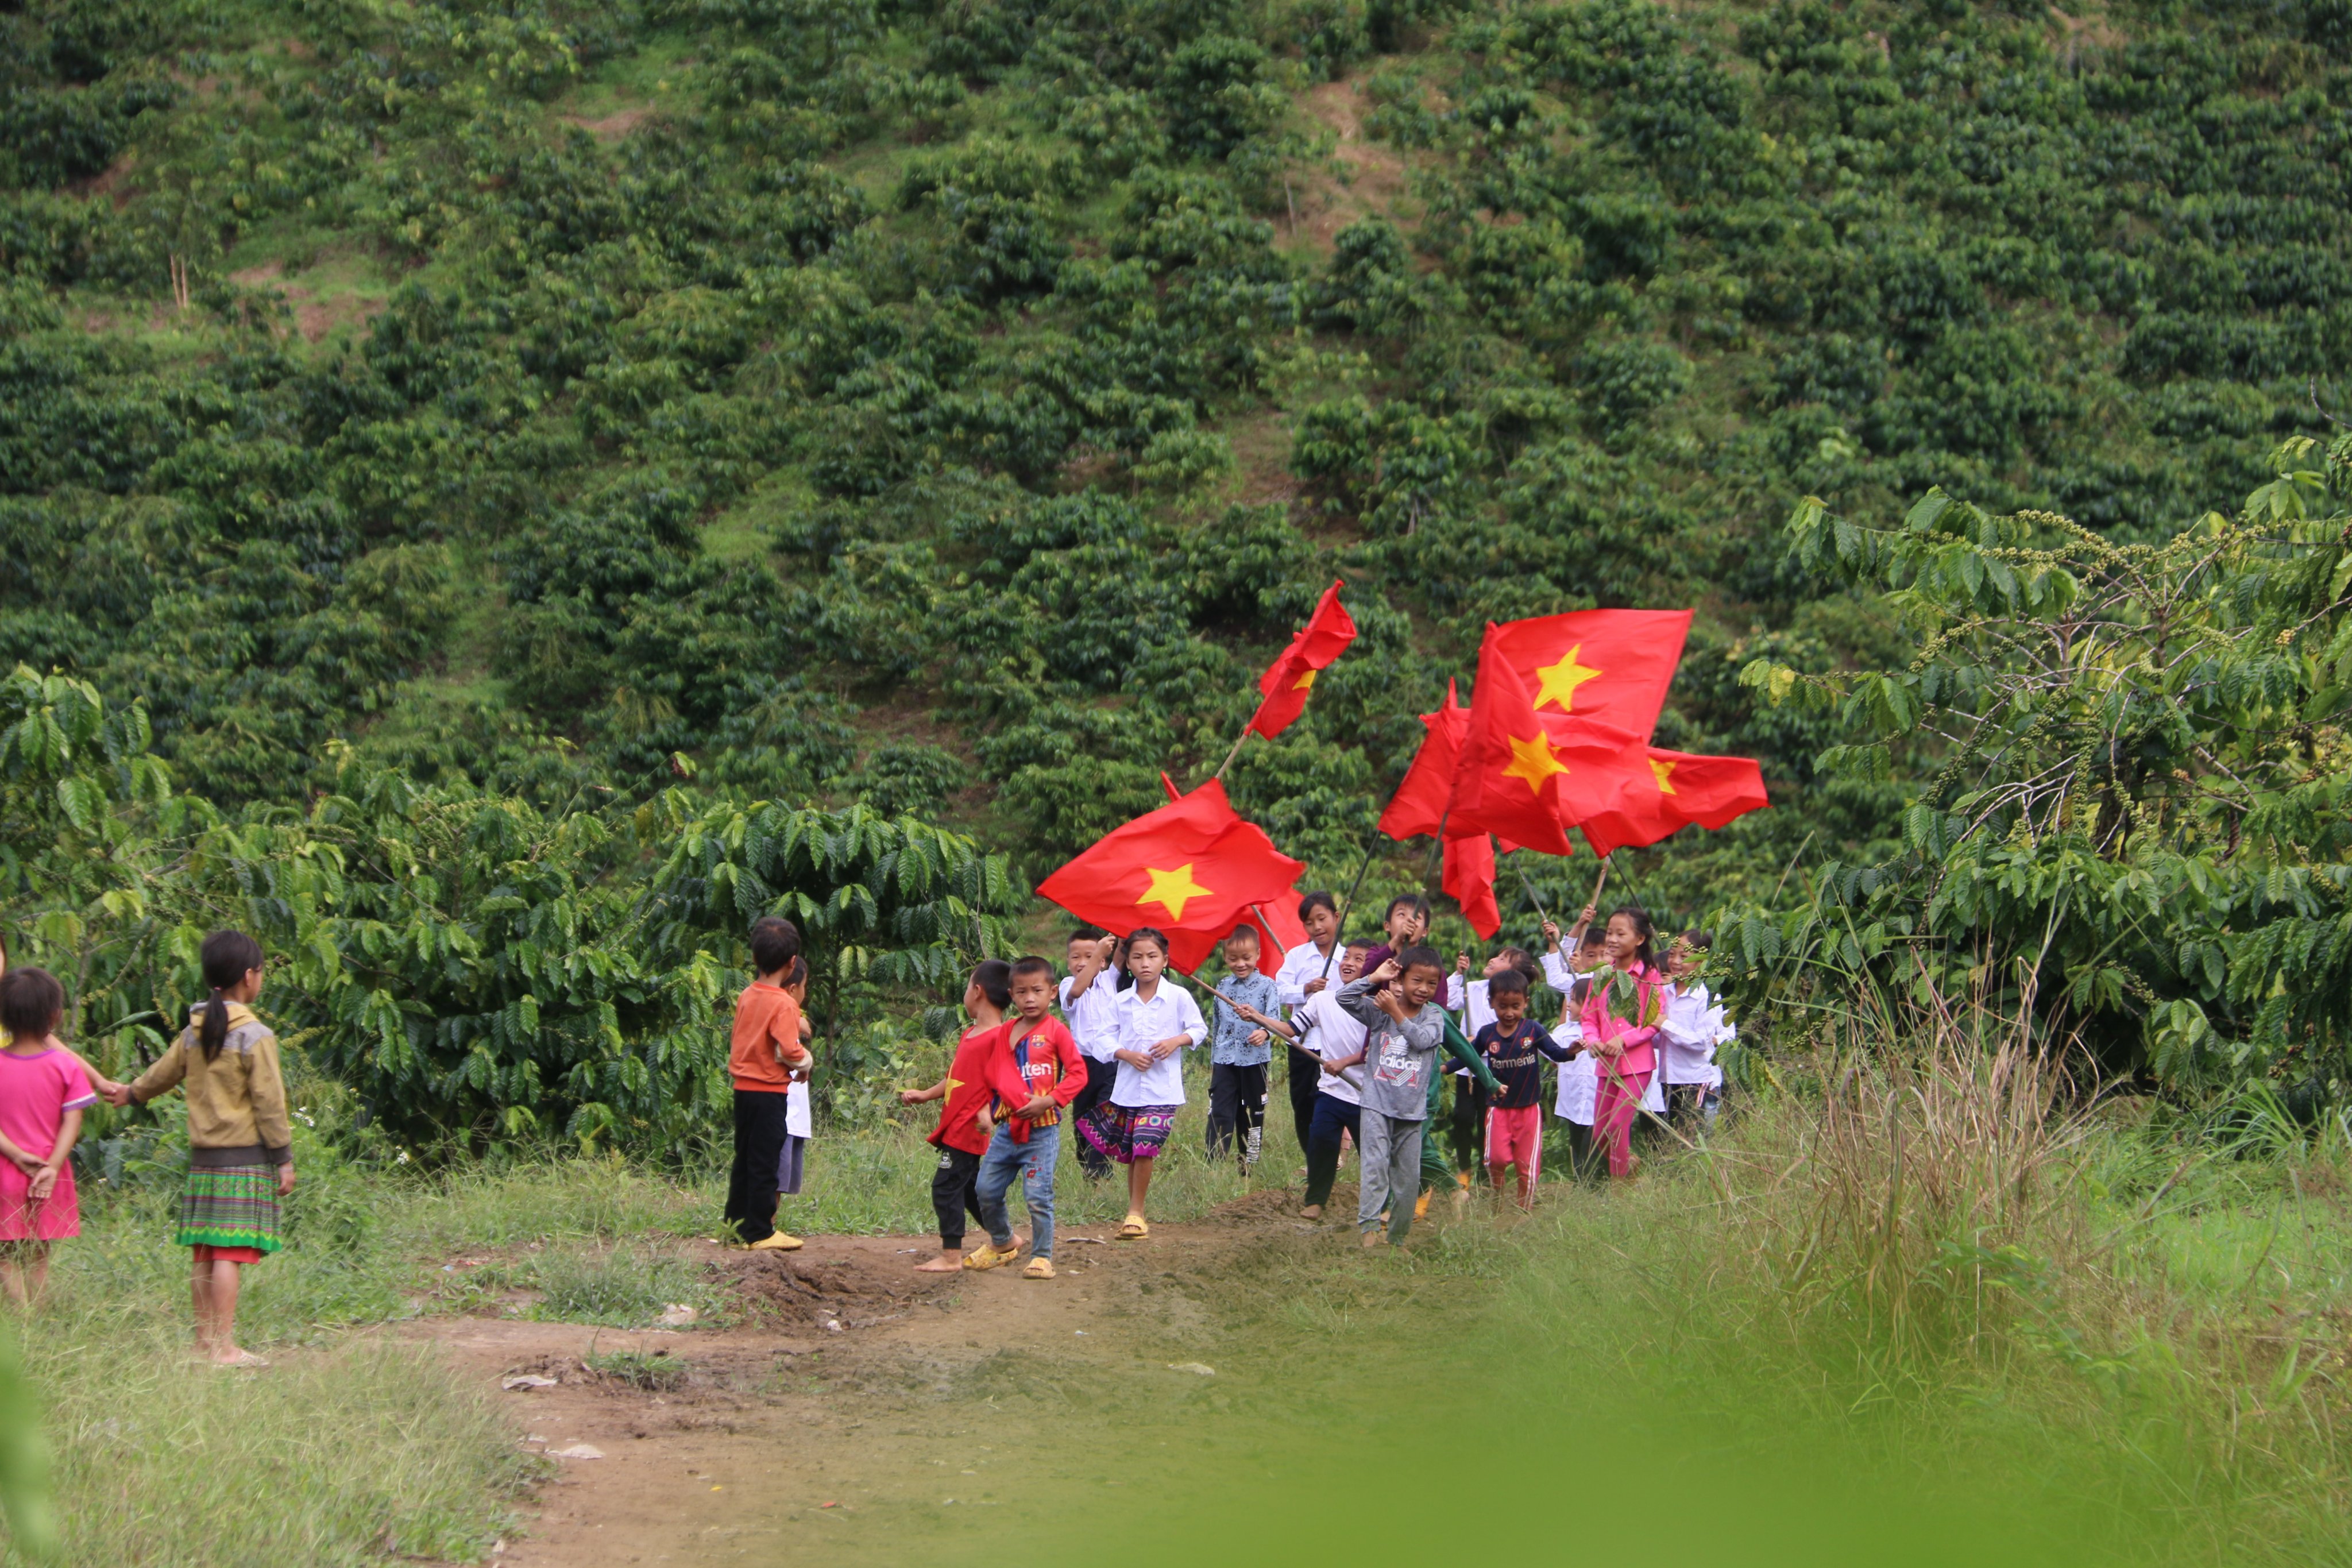 Students of La Van Cau Elementary School in Dak Nong Province wave national flags in celebration of the school opening, September 5, 2022. Photo: Tam An / Tuoi Tre